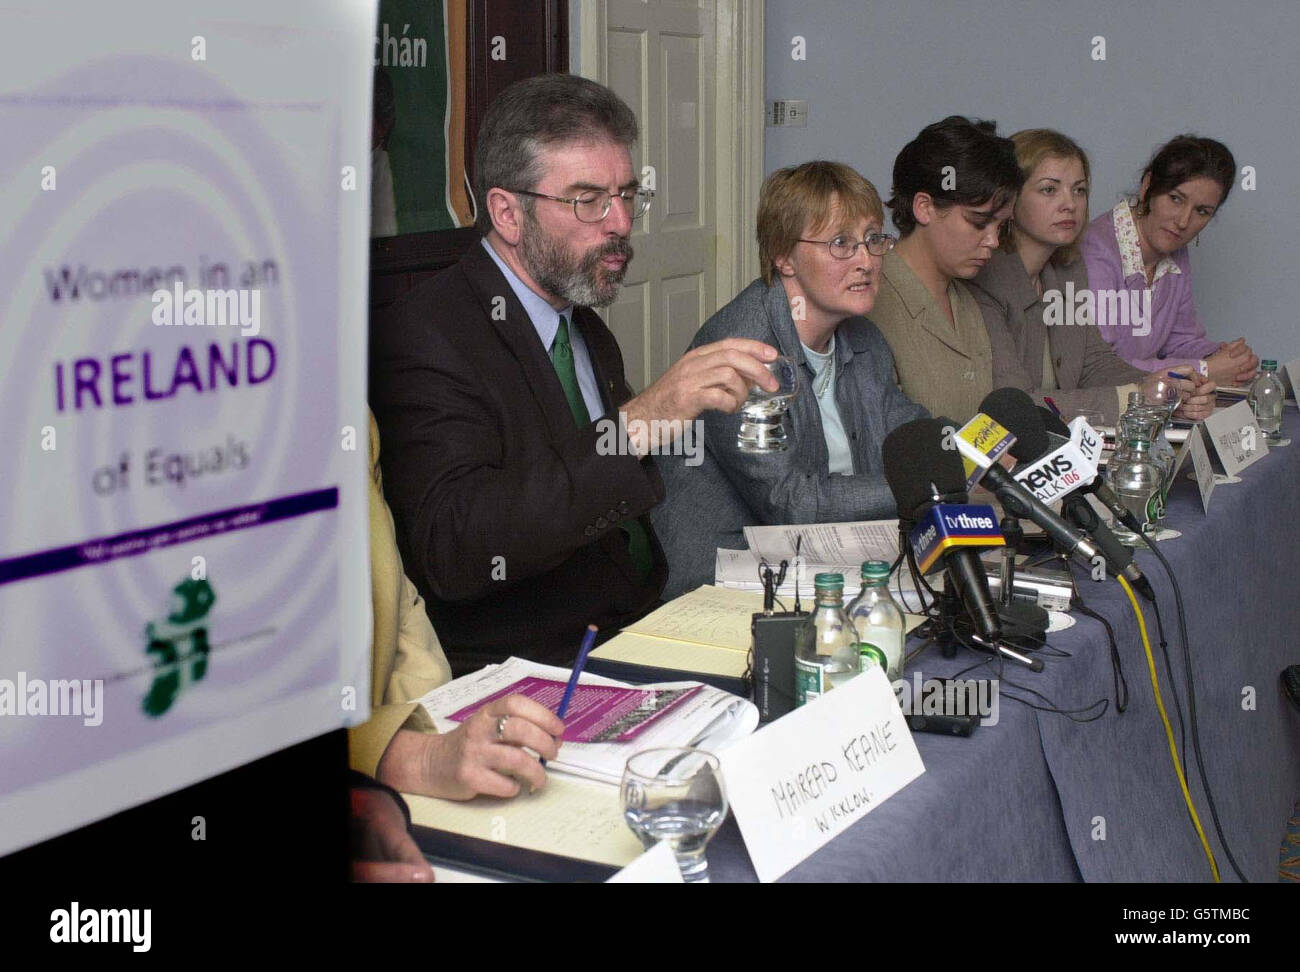 Gerry Adams, President of Sinn Fein in Dublin with (l-R) Anne Speed of the National Women's Forum, Mary Lou- Sinne Fein Candidate for Dublin West, Frances McCole, Sinn Fein Candidate for Dublin North Central and Lucilta Breathnach director of elections for Sinn Fein. * ... talking to the media about Sinn Fein's policies for women. Stock Photo